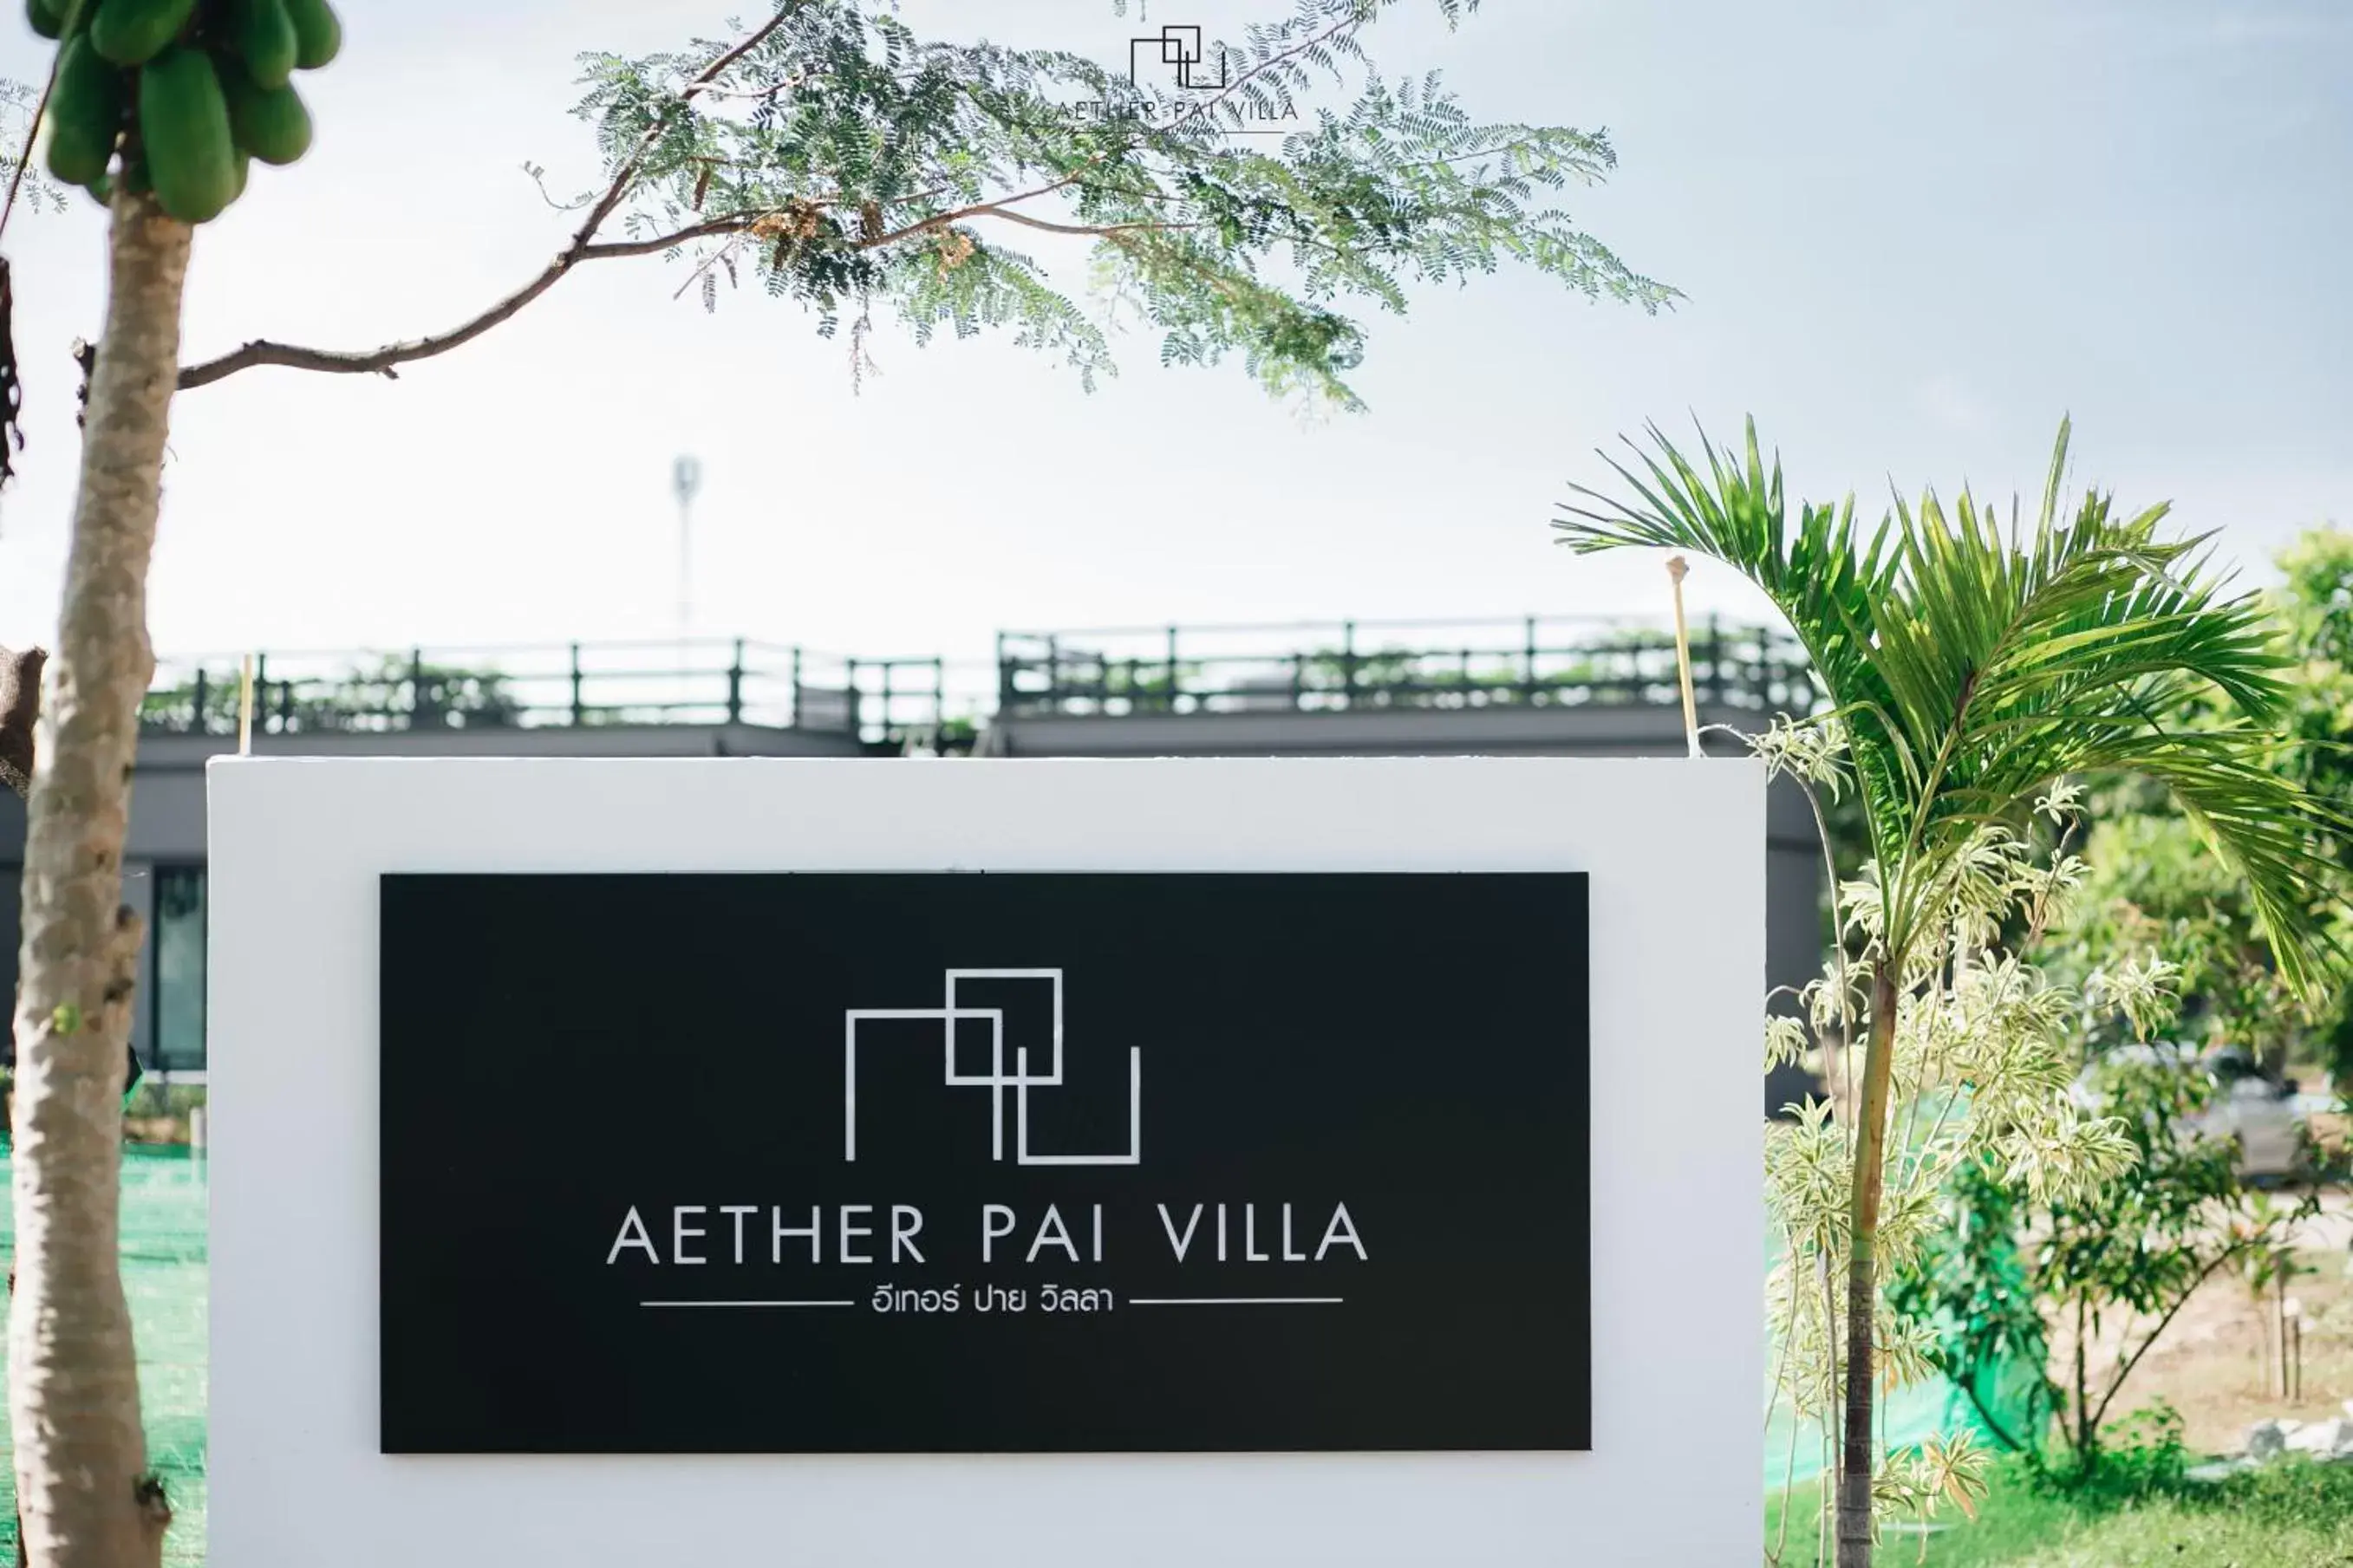 Property logo or sign in Aether Pai Villa